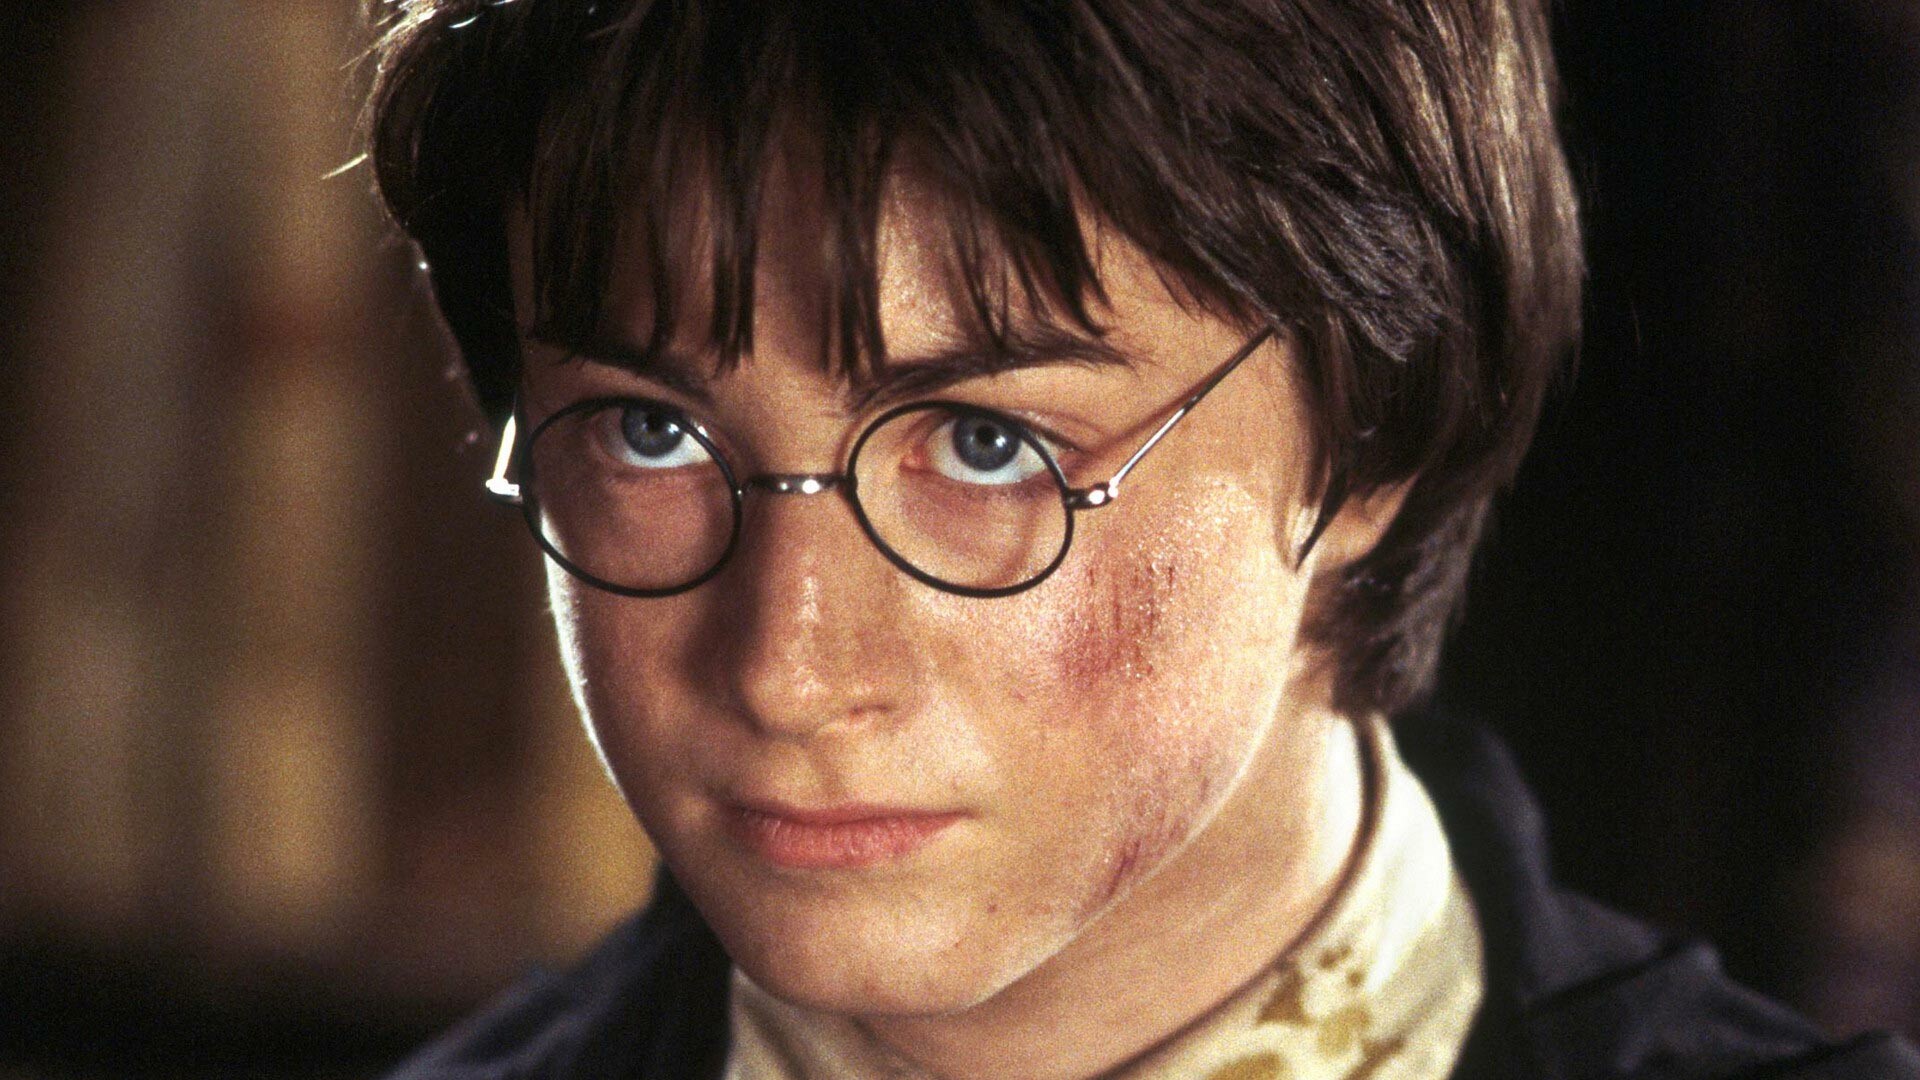 Harry Potter: The adventures of young wizard, Daniel Radcliffe. 1920x1080 Full HD Wallpaper.